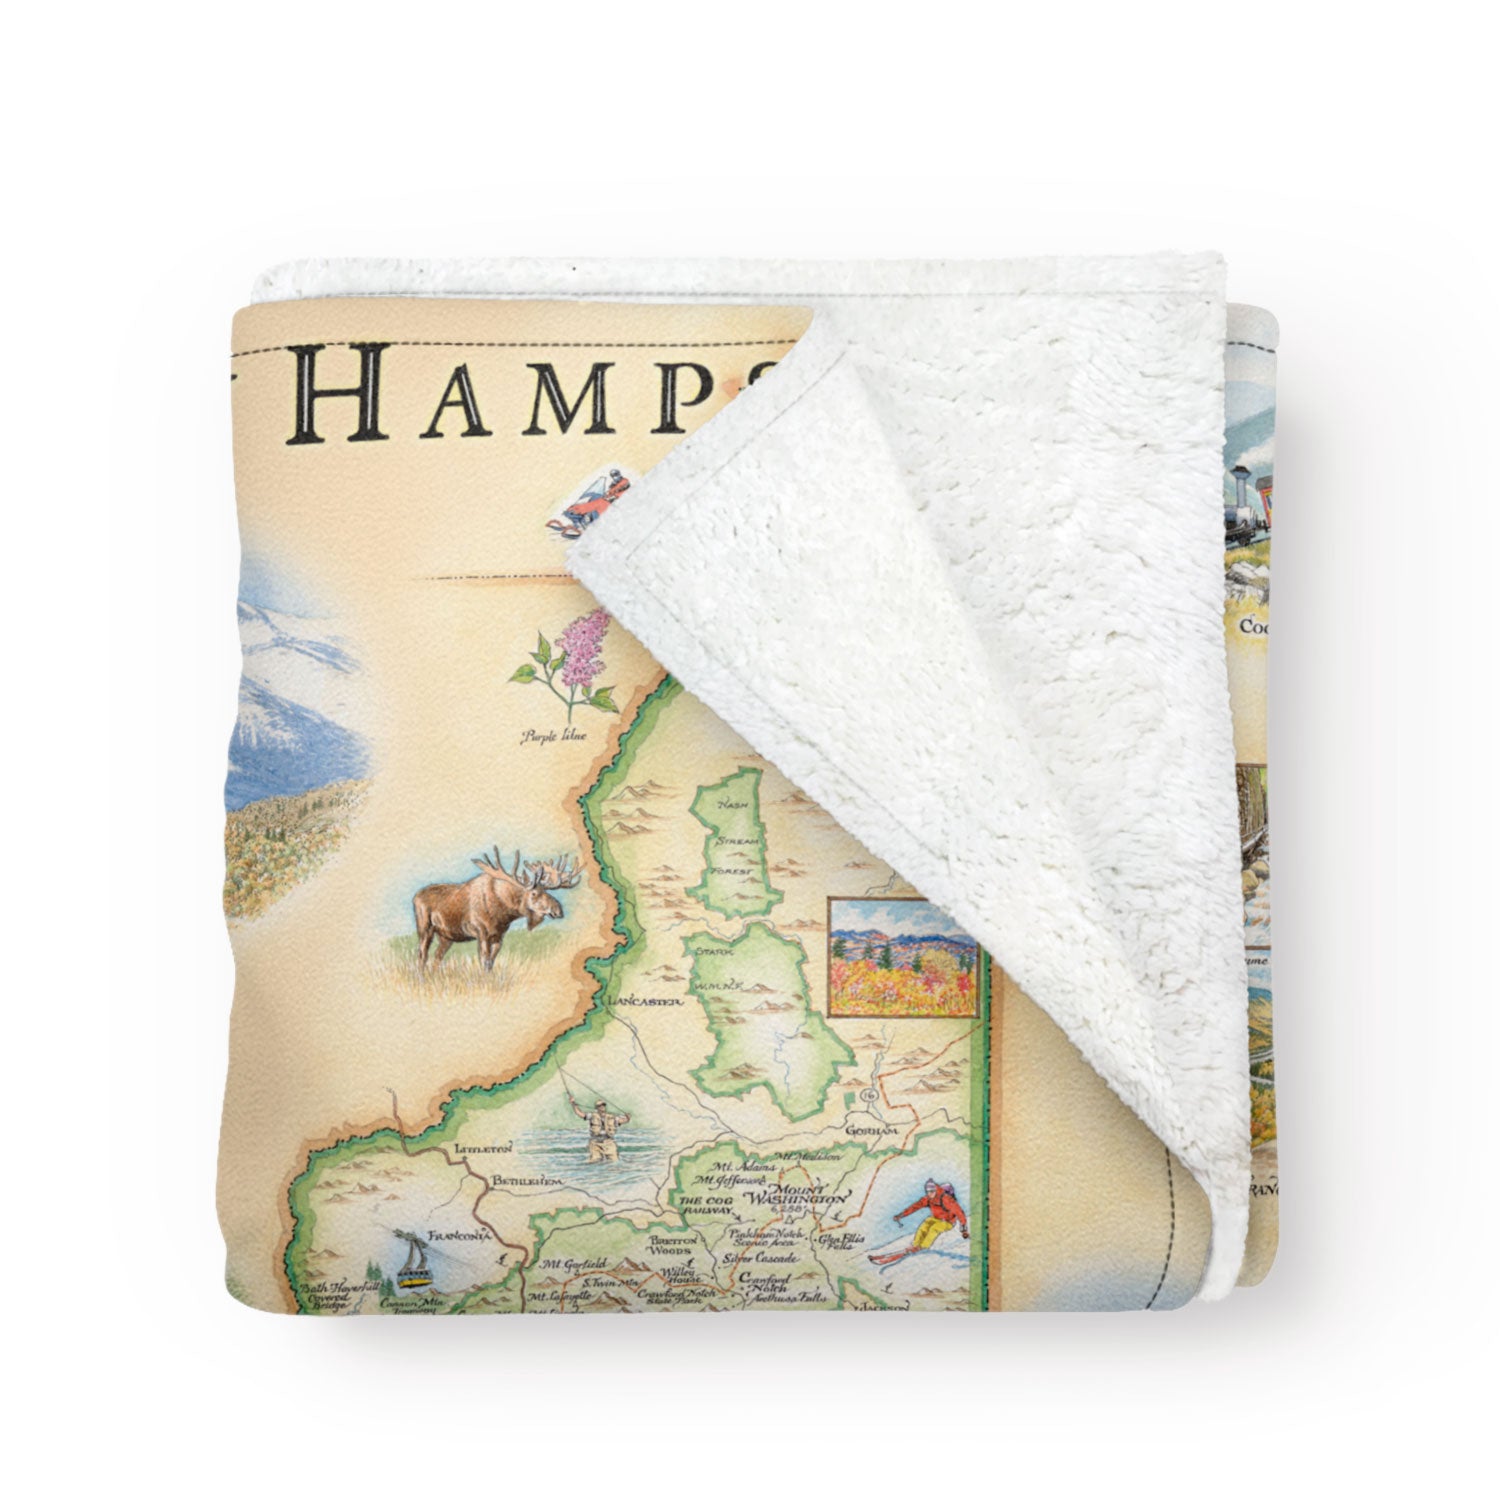 Folded fleece blanket with map of New Hampshire on it. Cozy and soft, the blanket measures 58